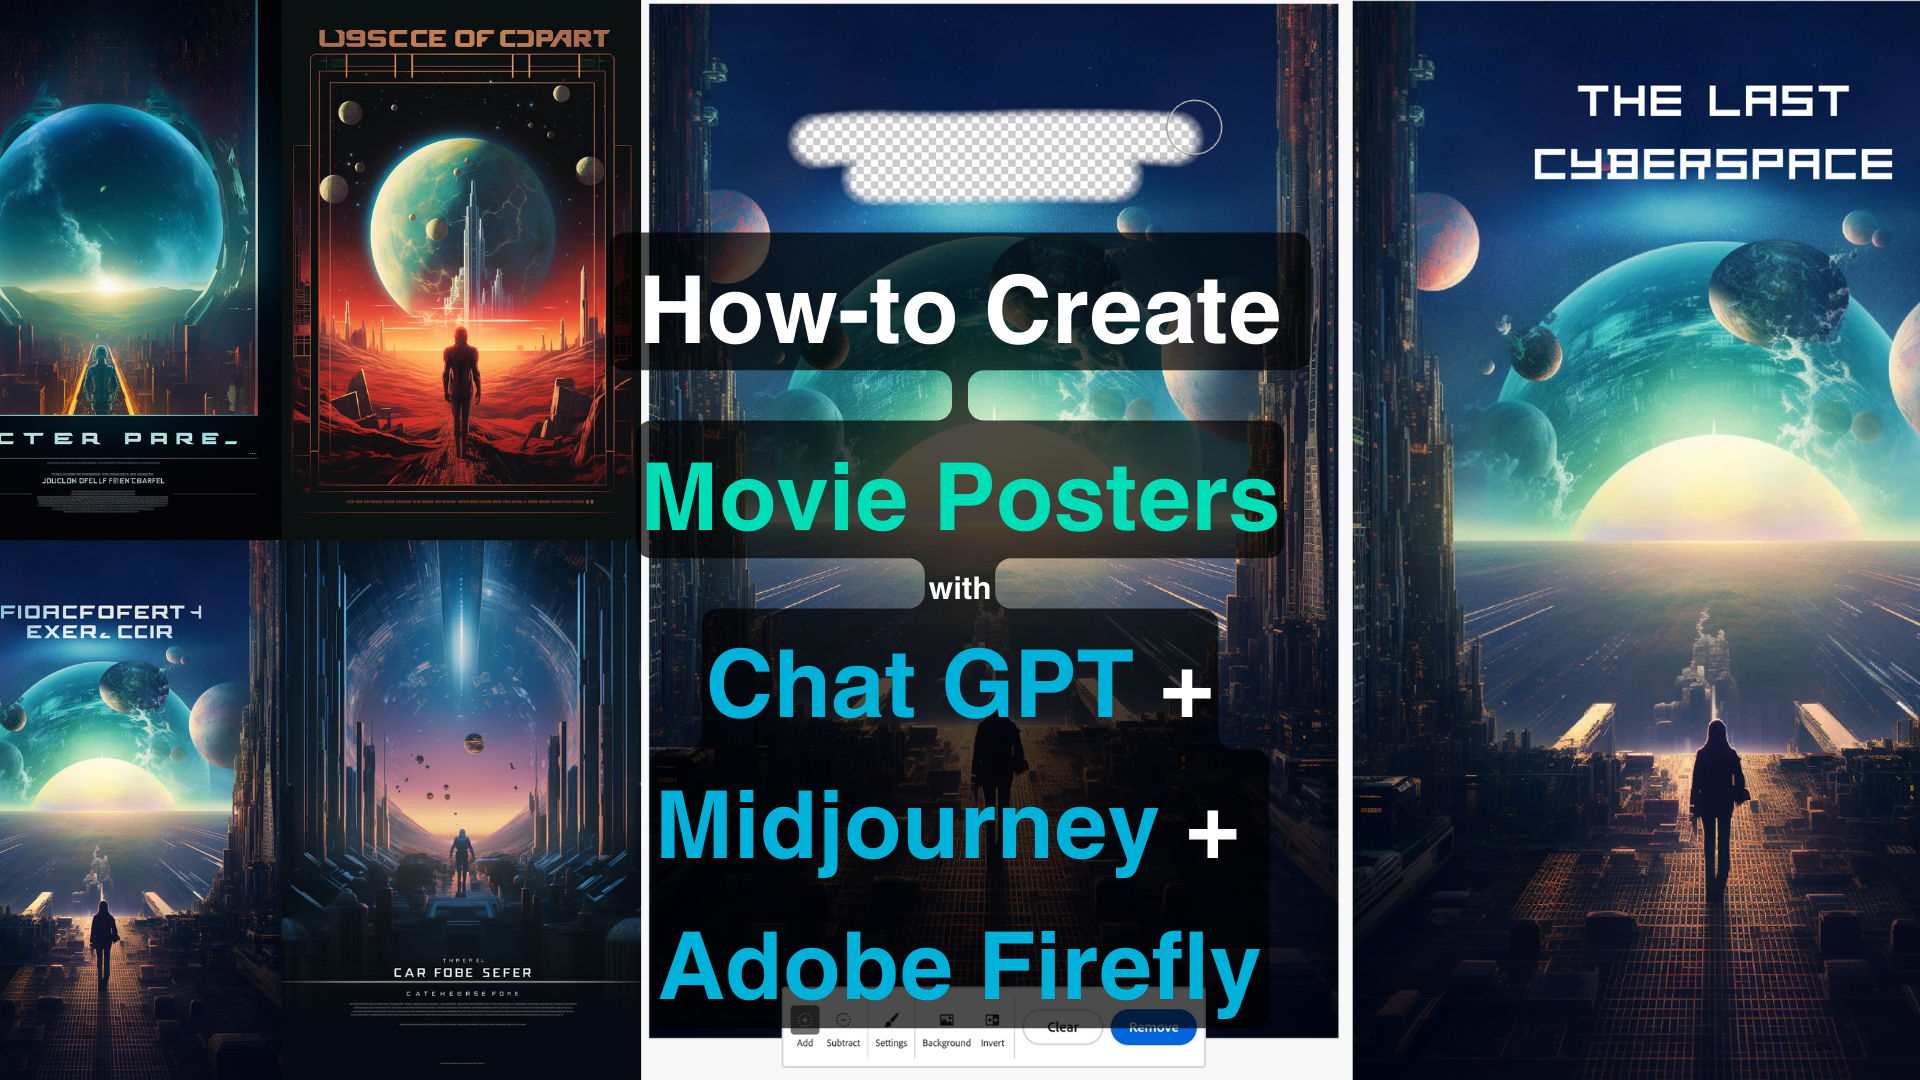 Using ChatGPT, Midjourney, and Adobe Firefly to Create Movie Posters